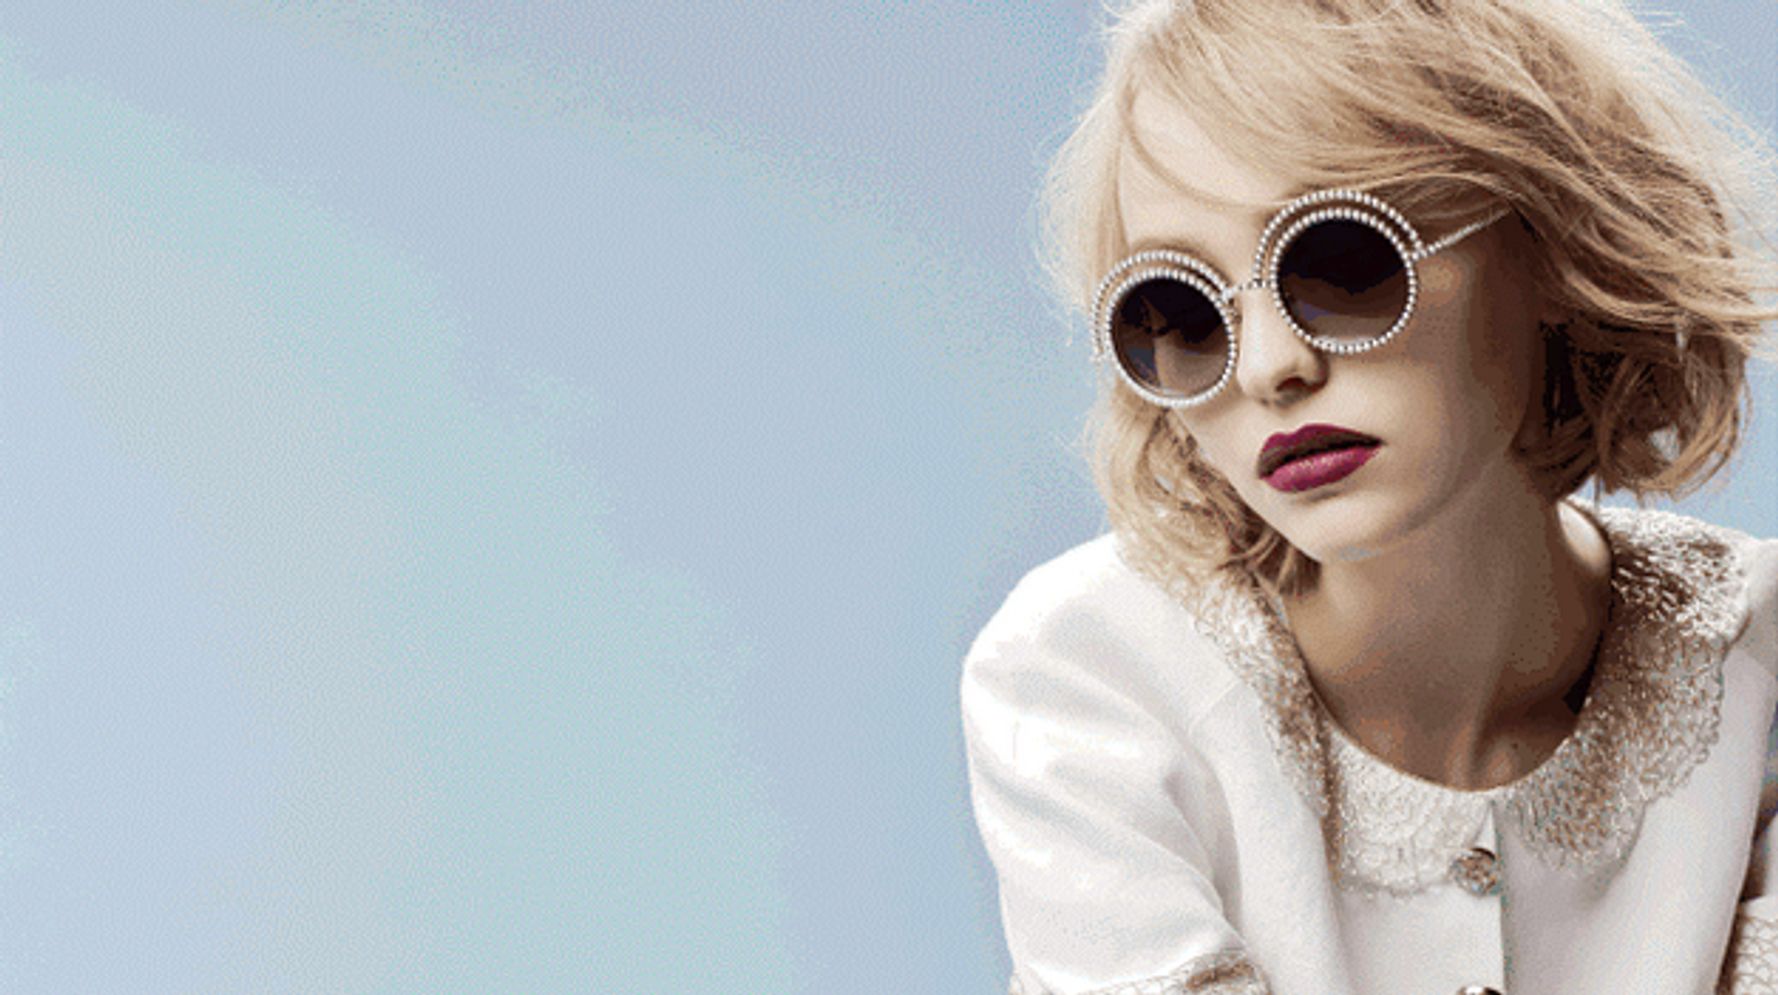 Lily-Rose Depp Is The New Face Of Chanel Fragrance